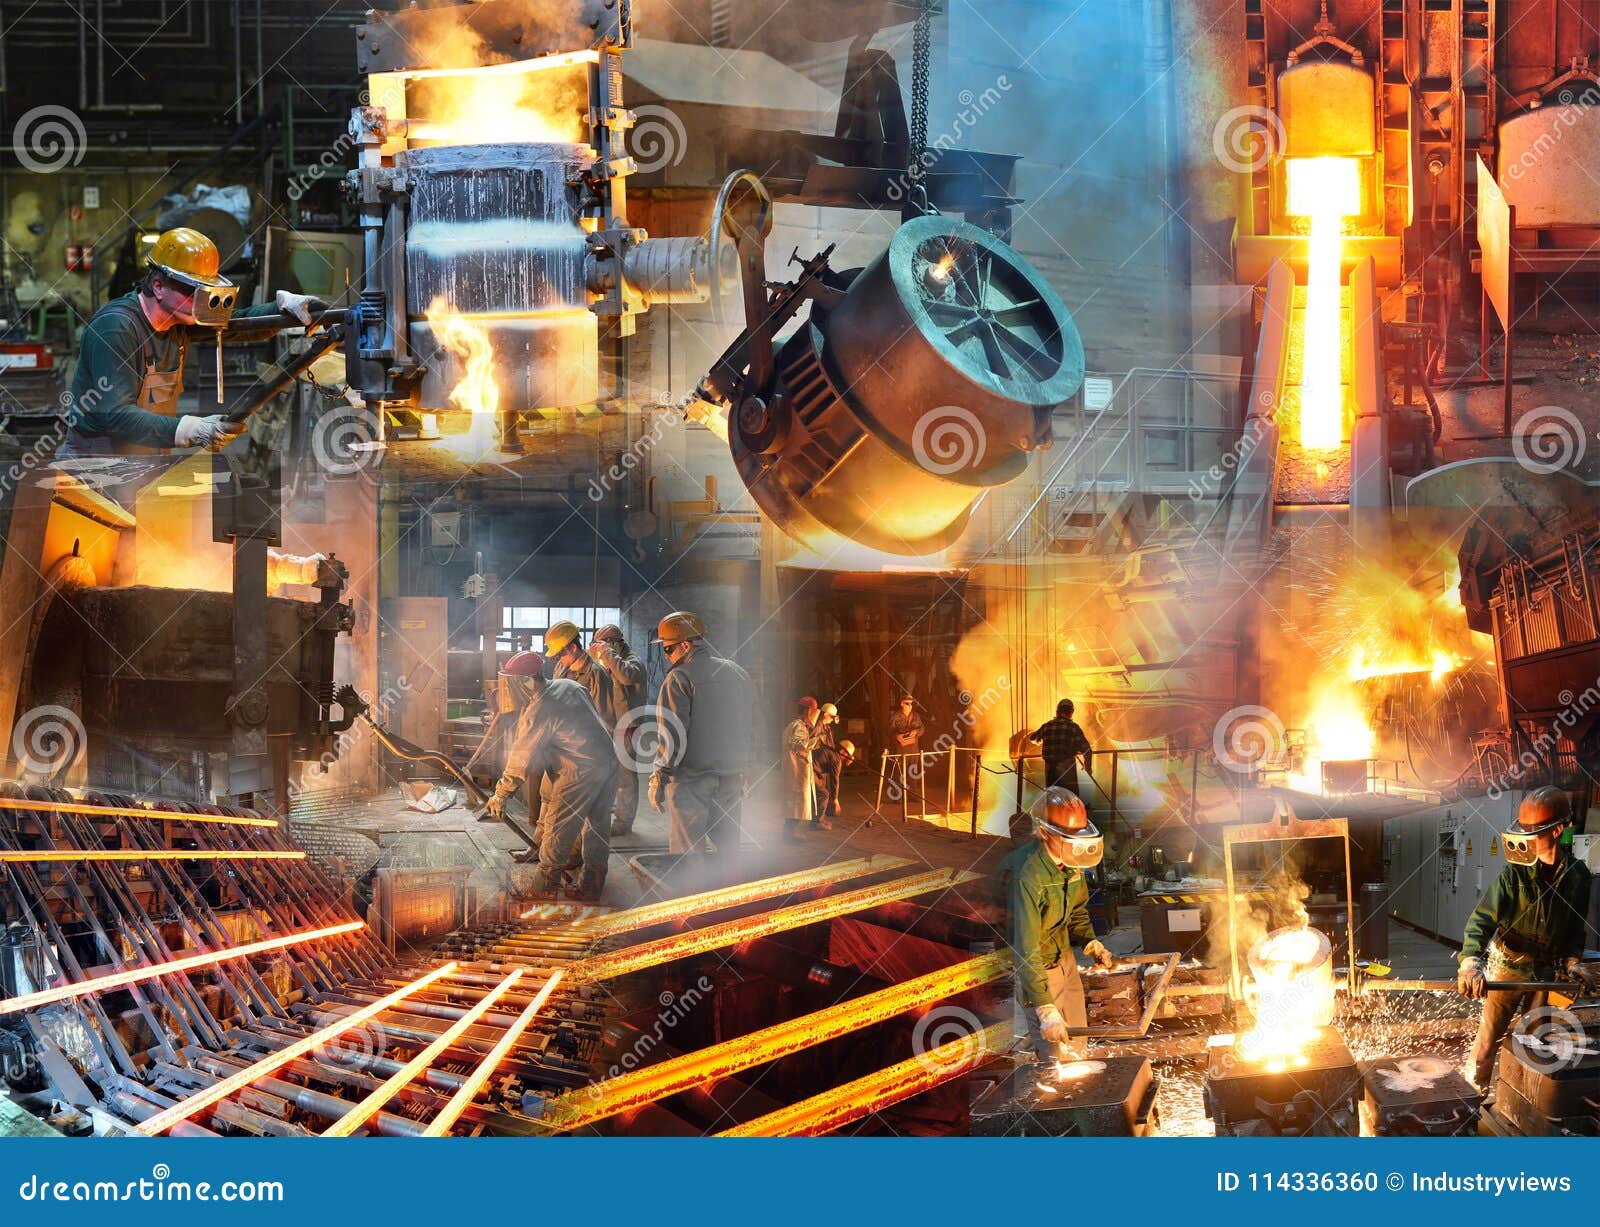 foundry and steelworks - steel production and processing workers